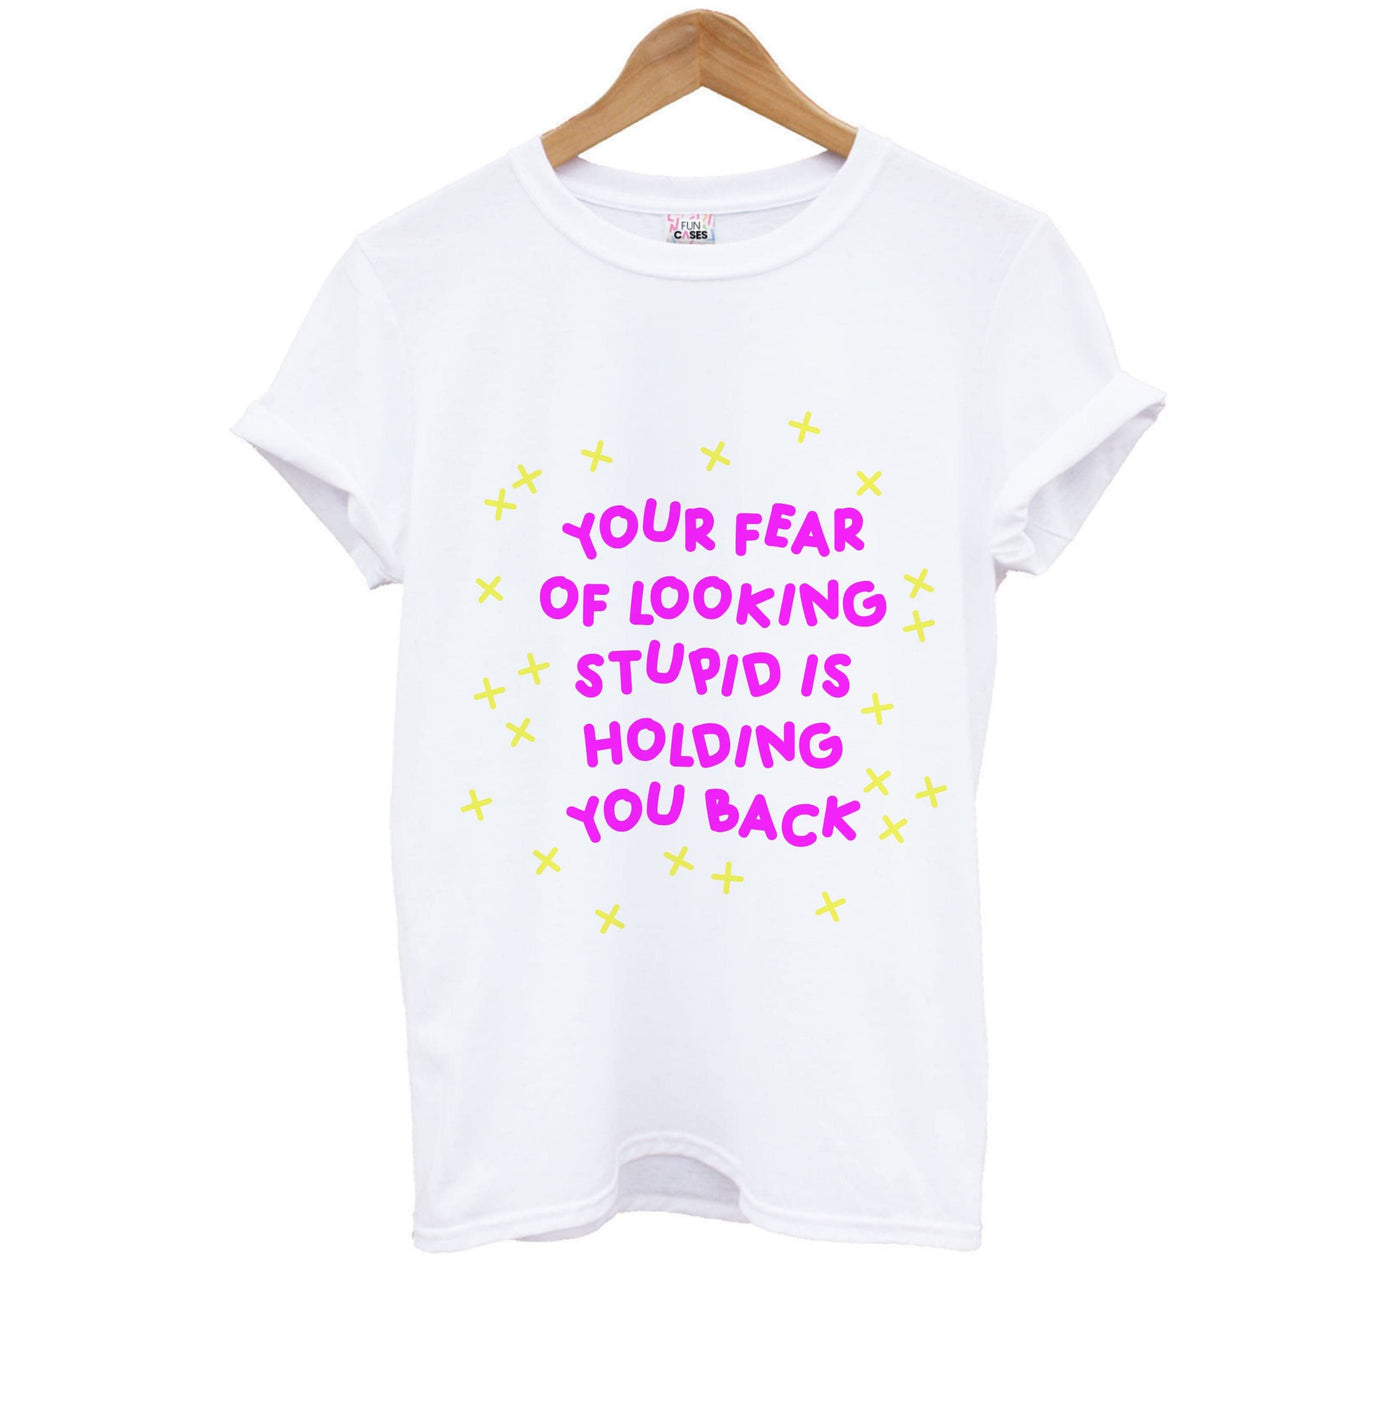 Your Fear Of Looking Stupid Is Holding You Back - Aesthetic Quote Kids T-Shirt